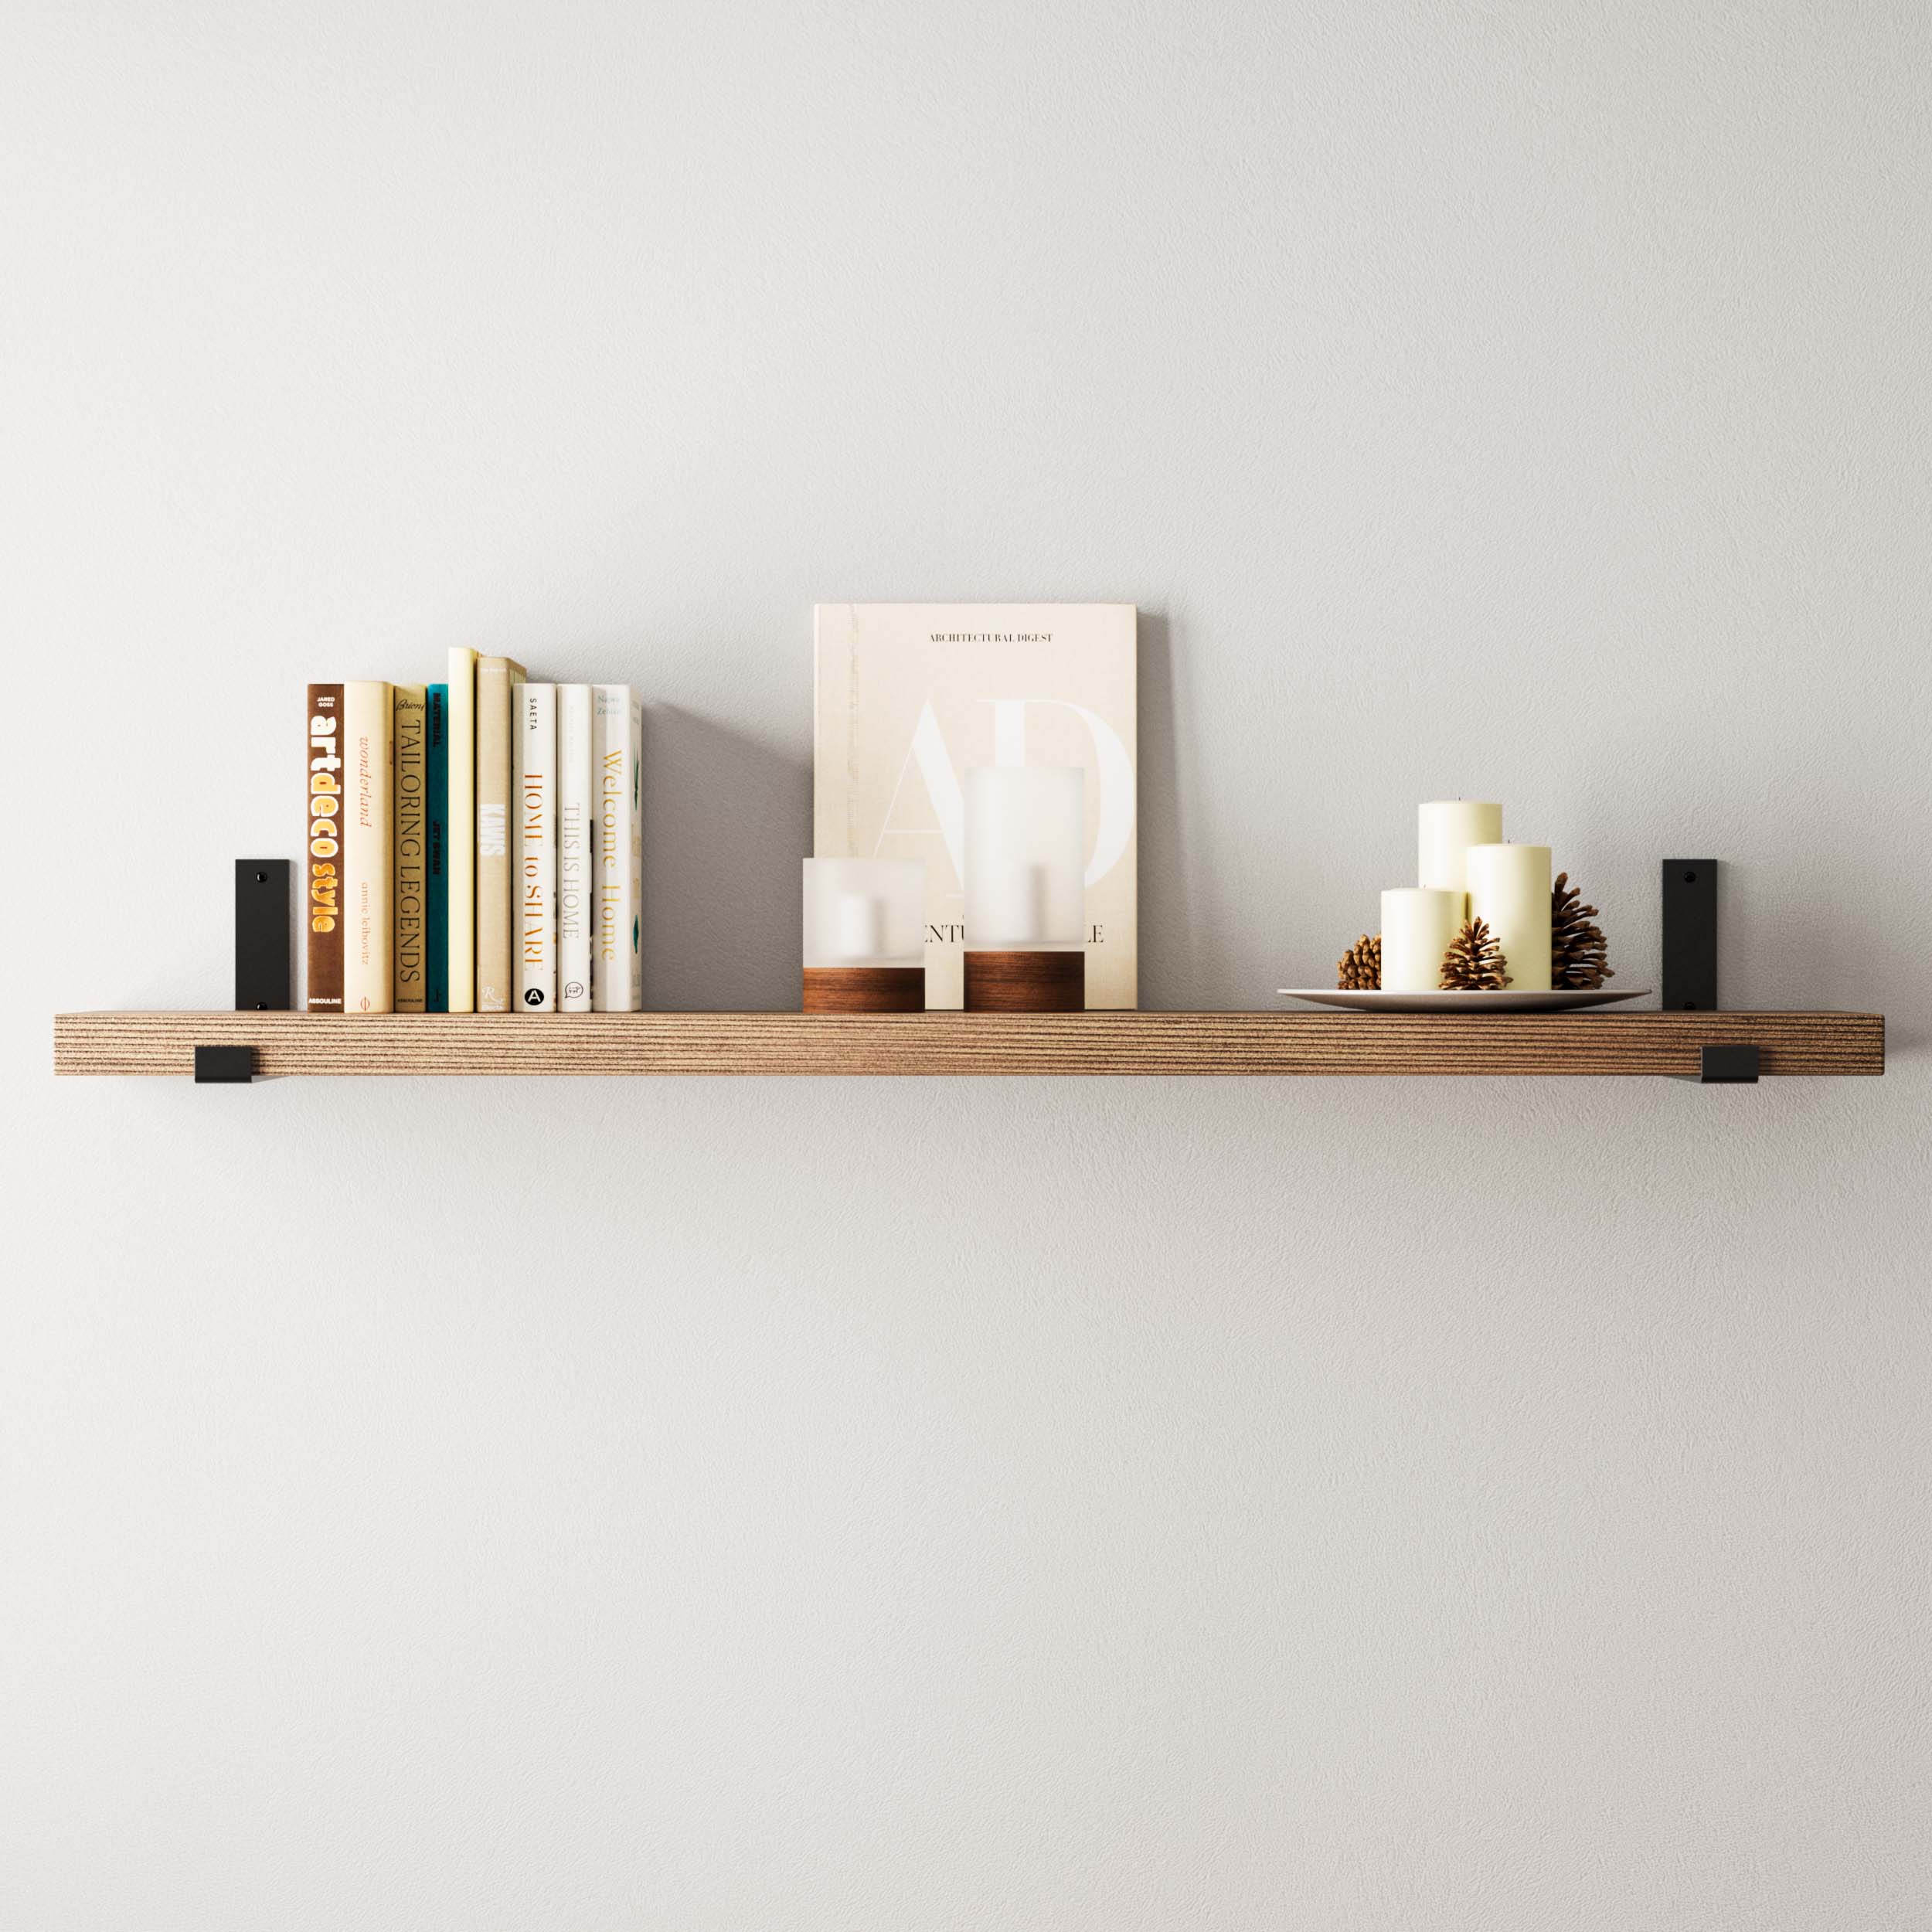 Stylish candles and books on a wall book shelf with black brackets agaisnt  a white textured wall.